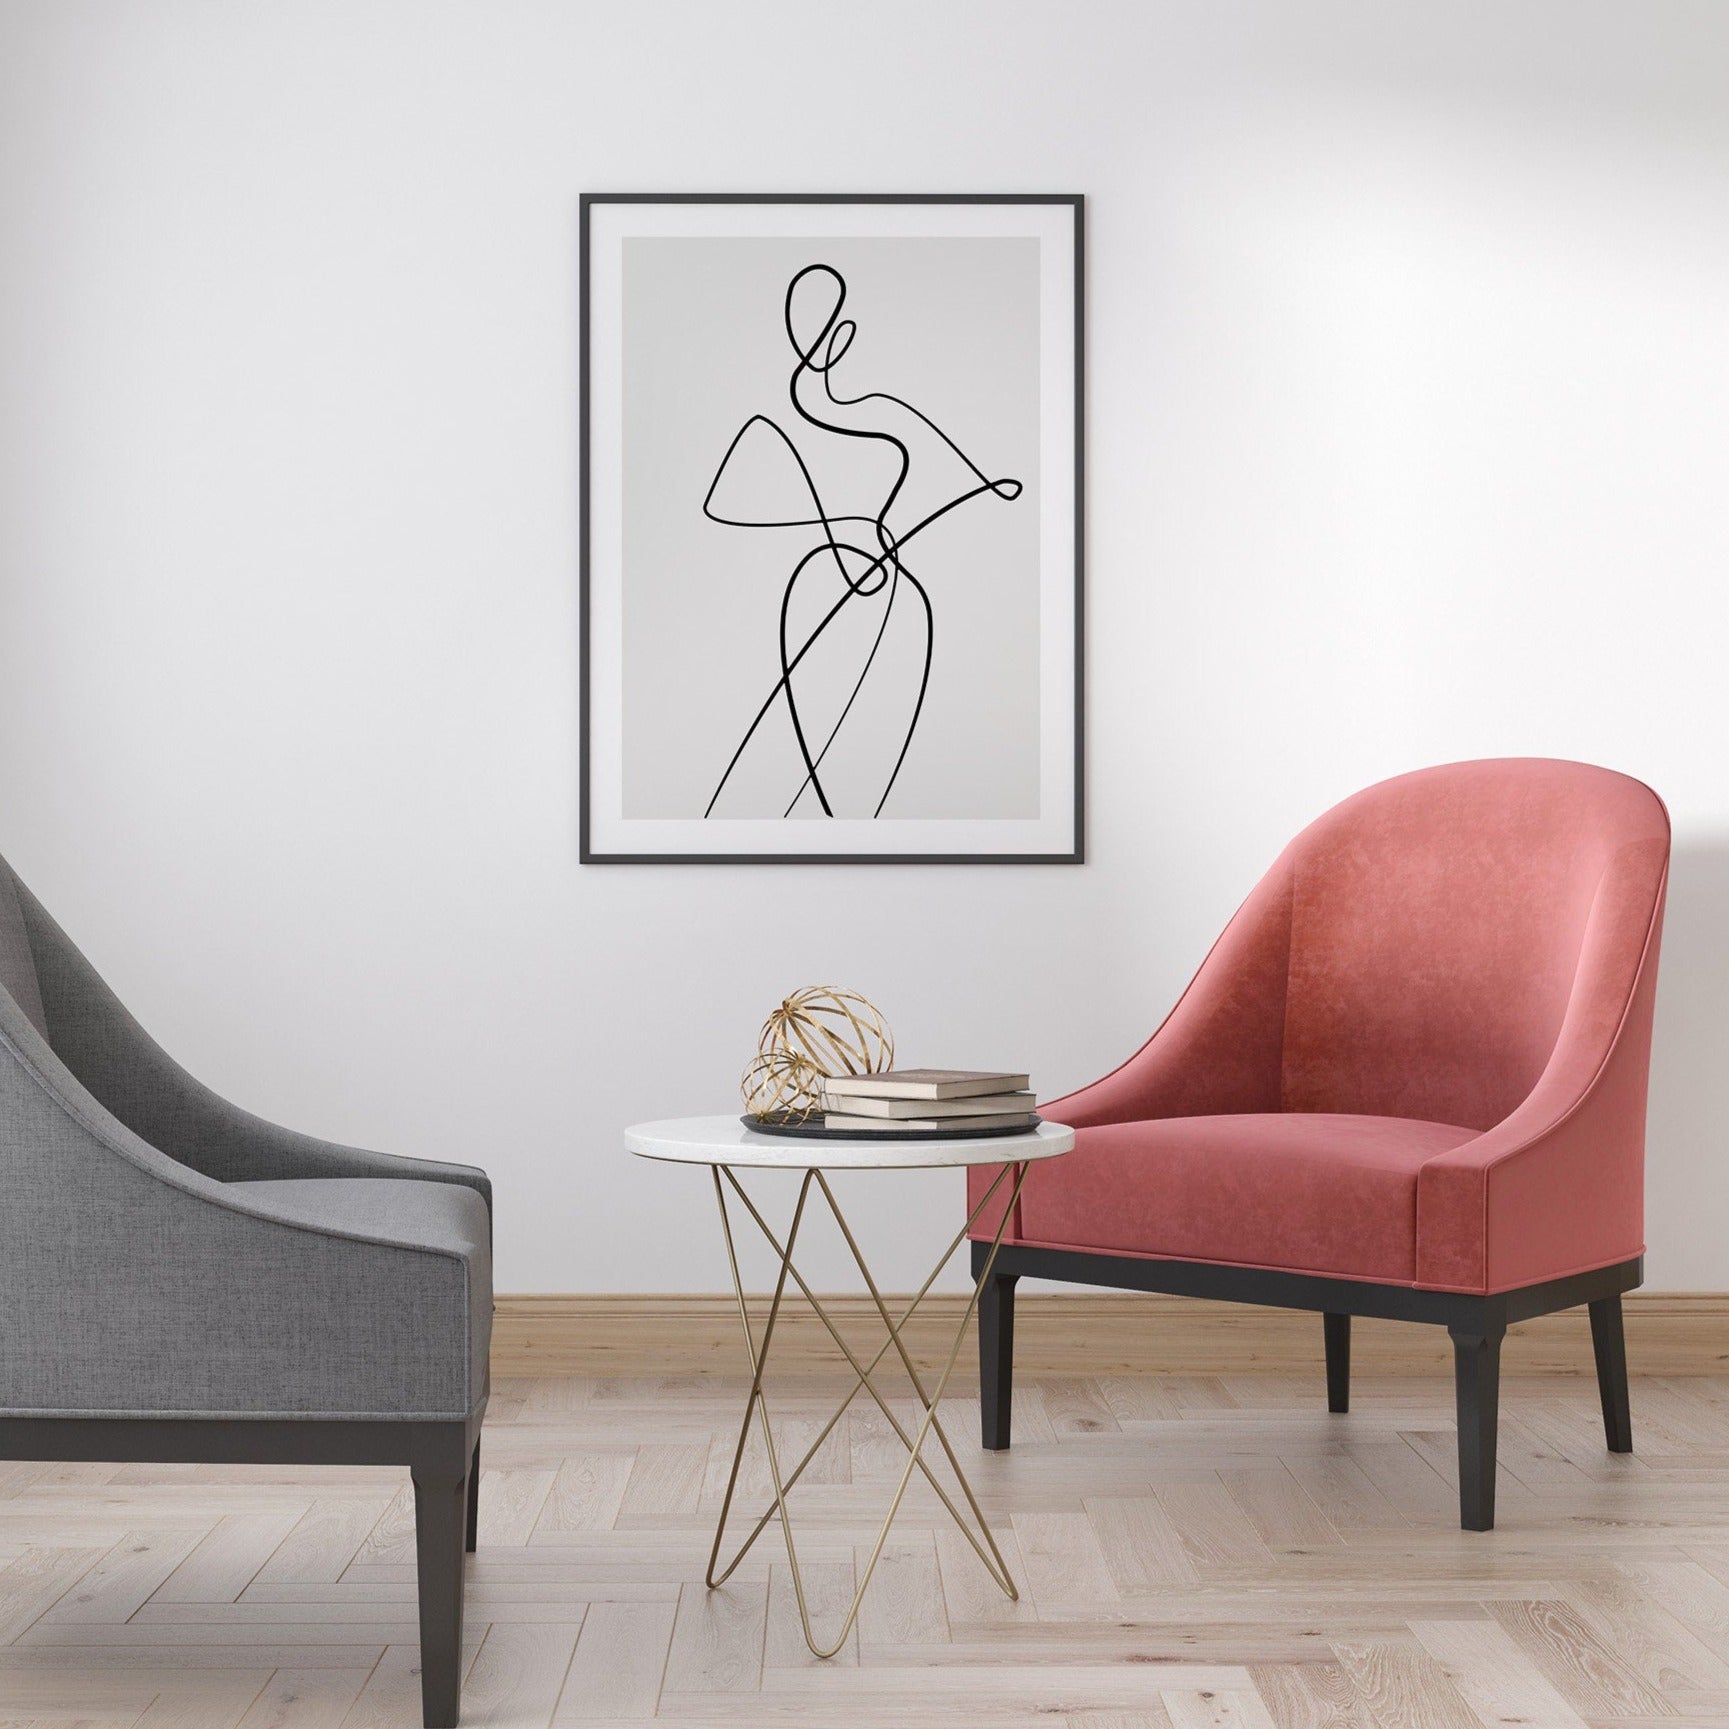 Minimalist line art featuring abstract nude woman